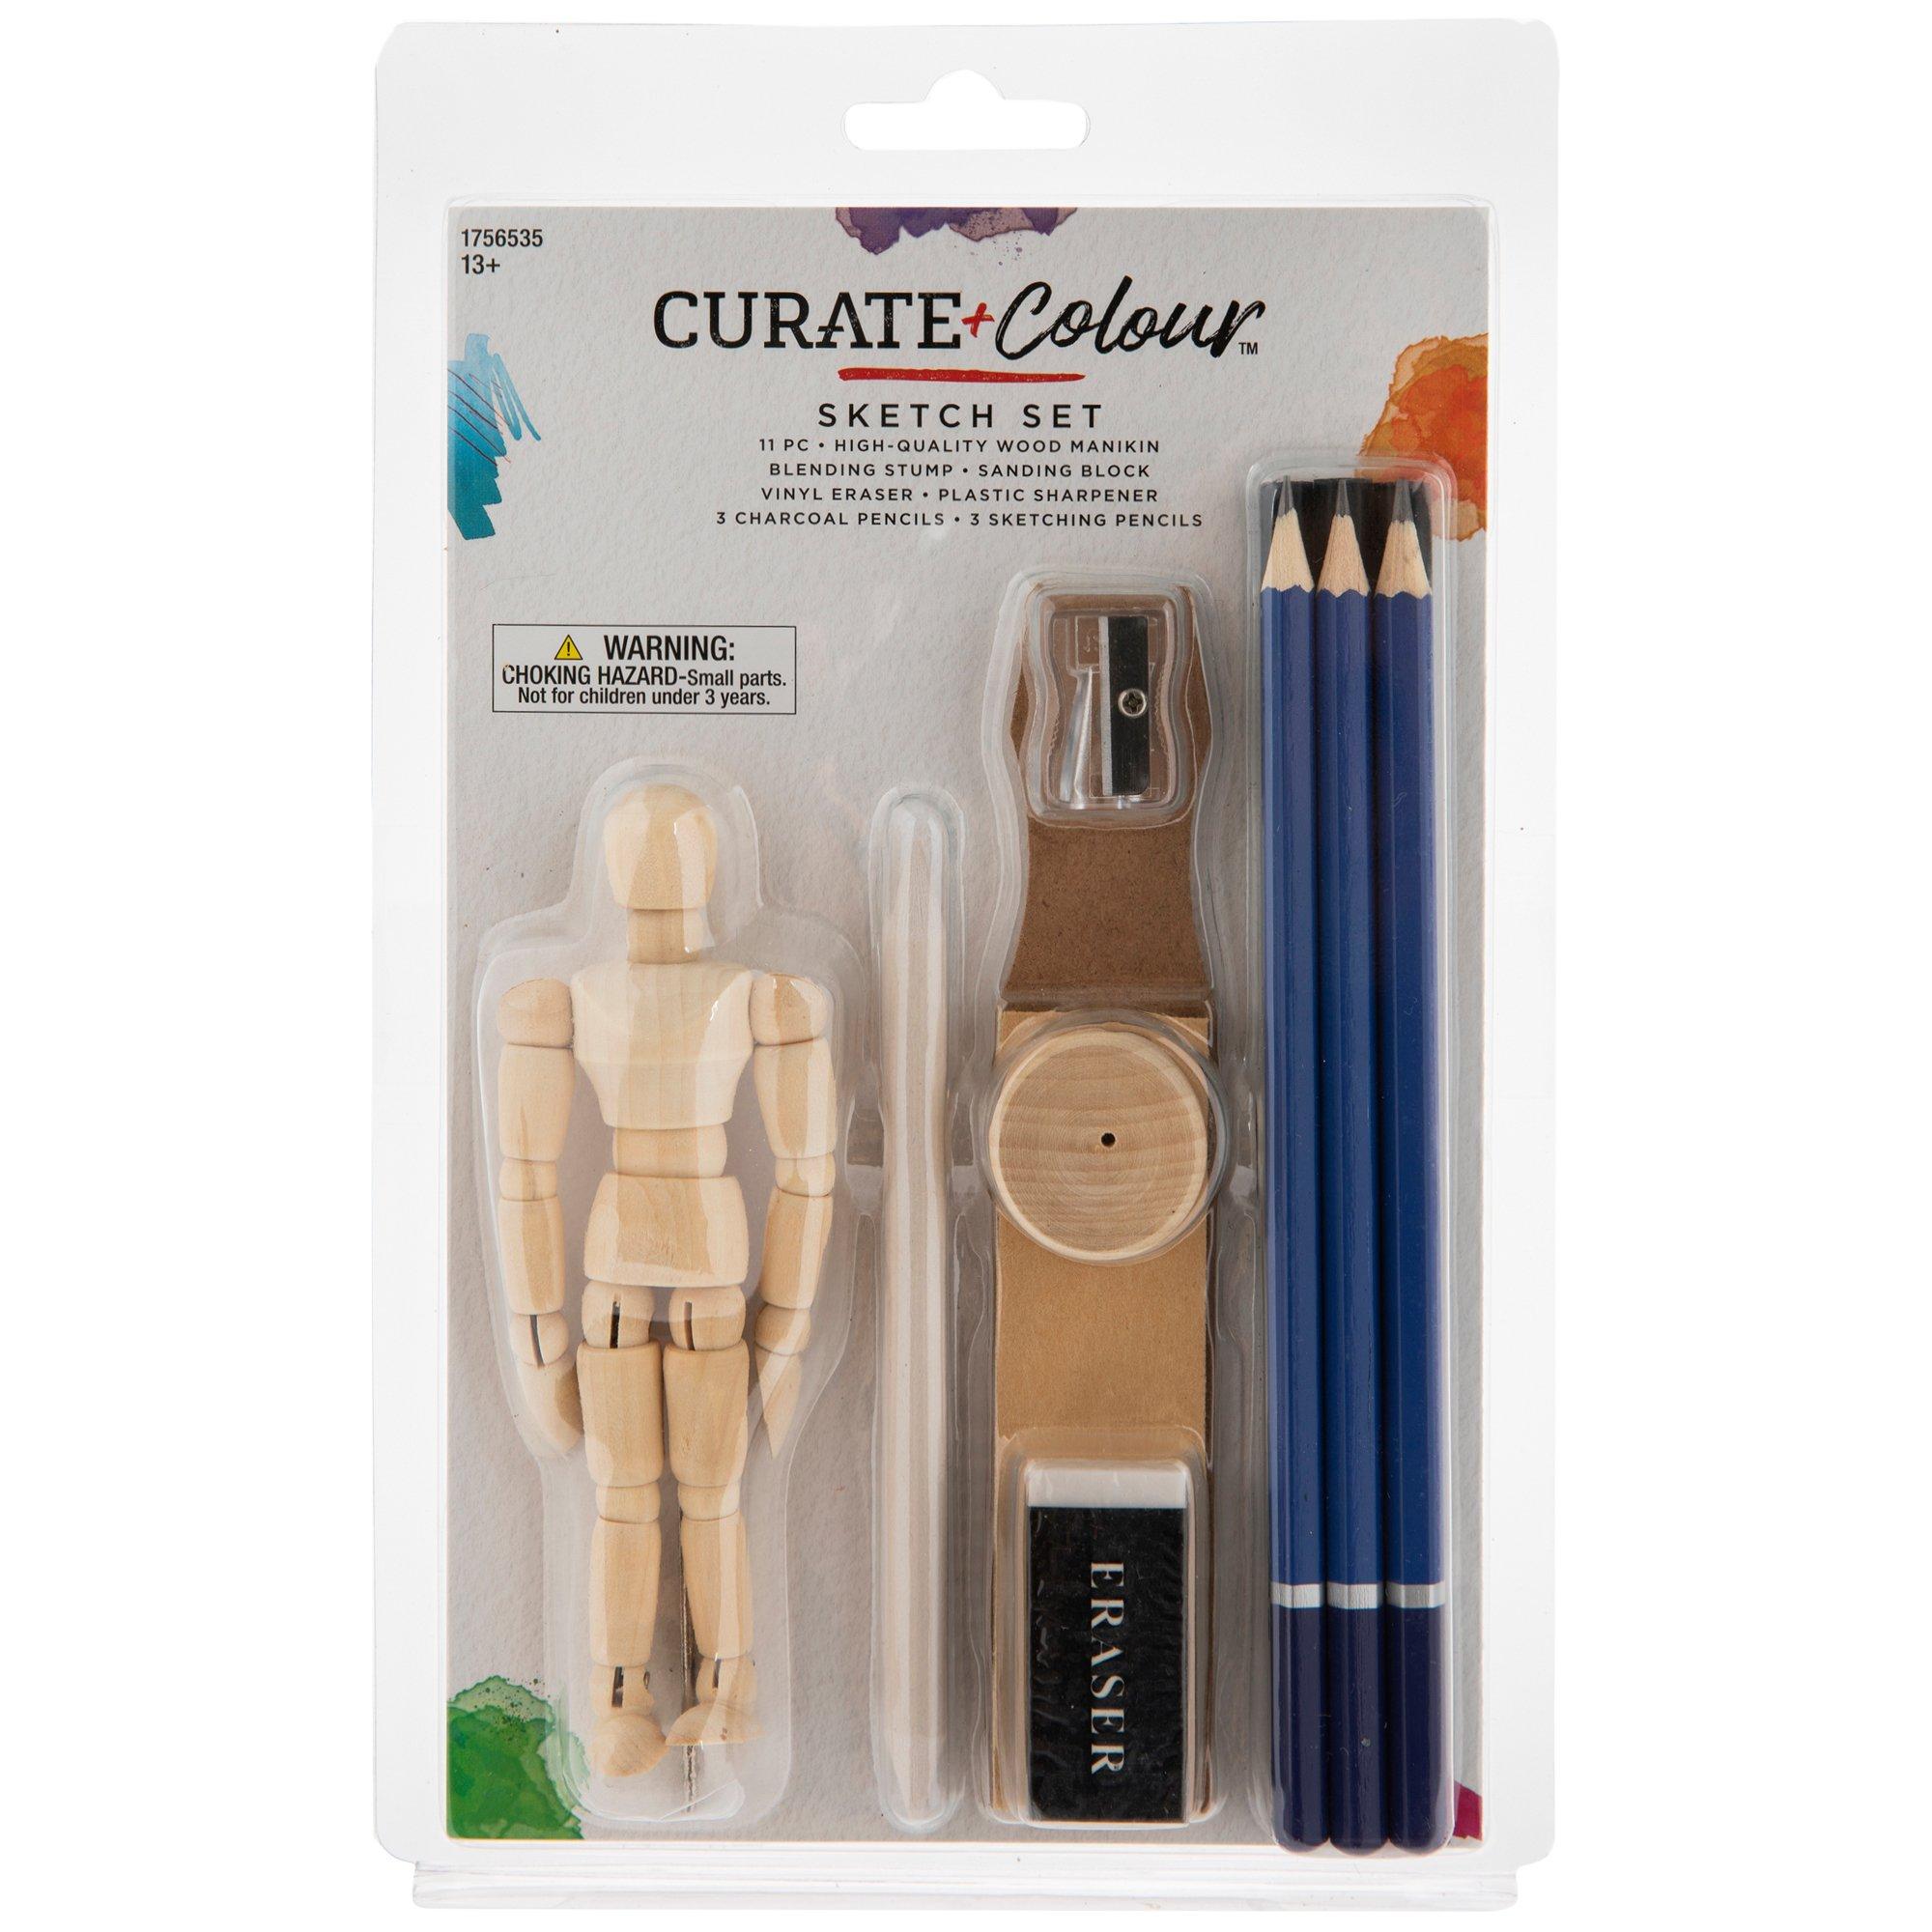 Pro Art Mannequin All In One Drawing Set - 11 Piece